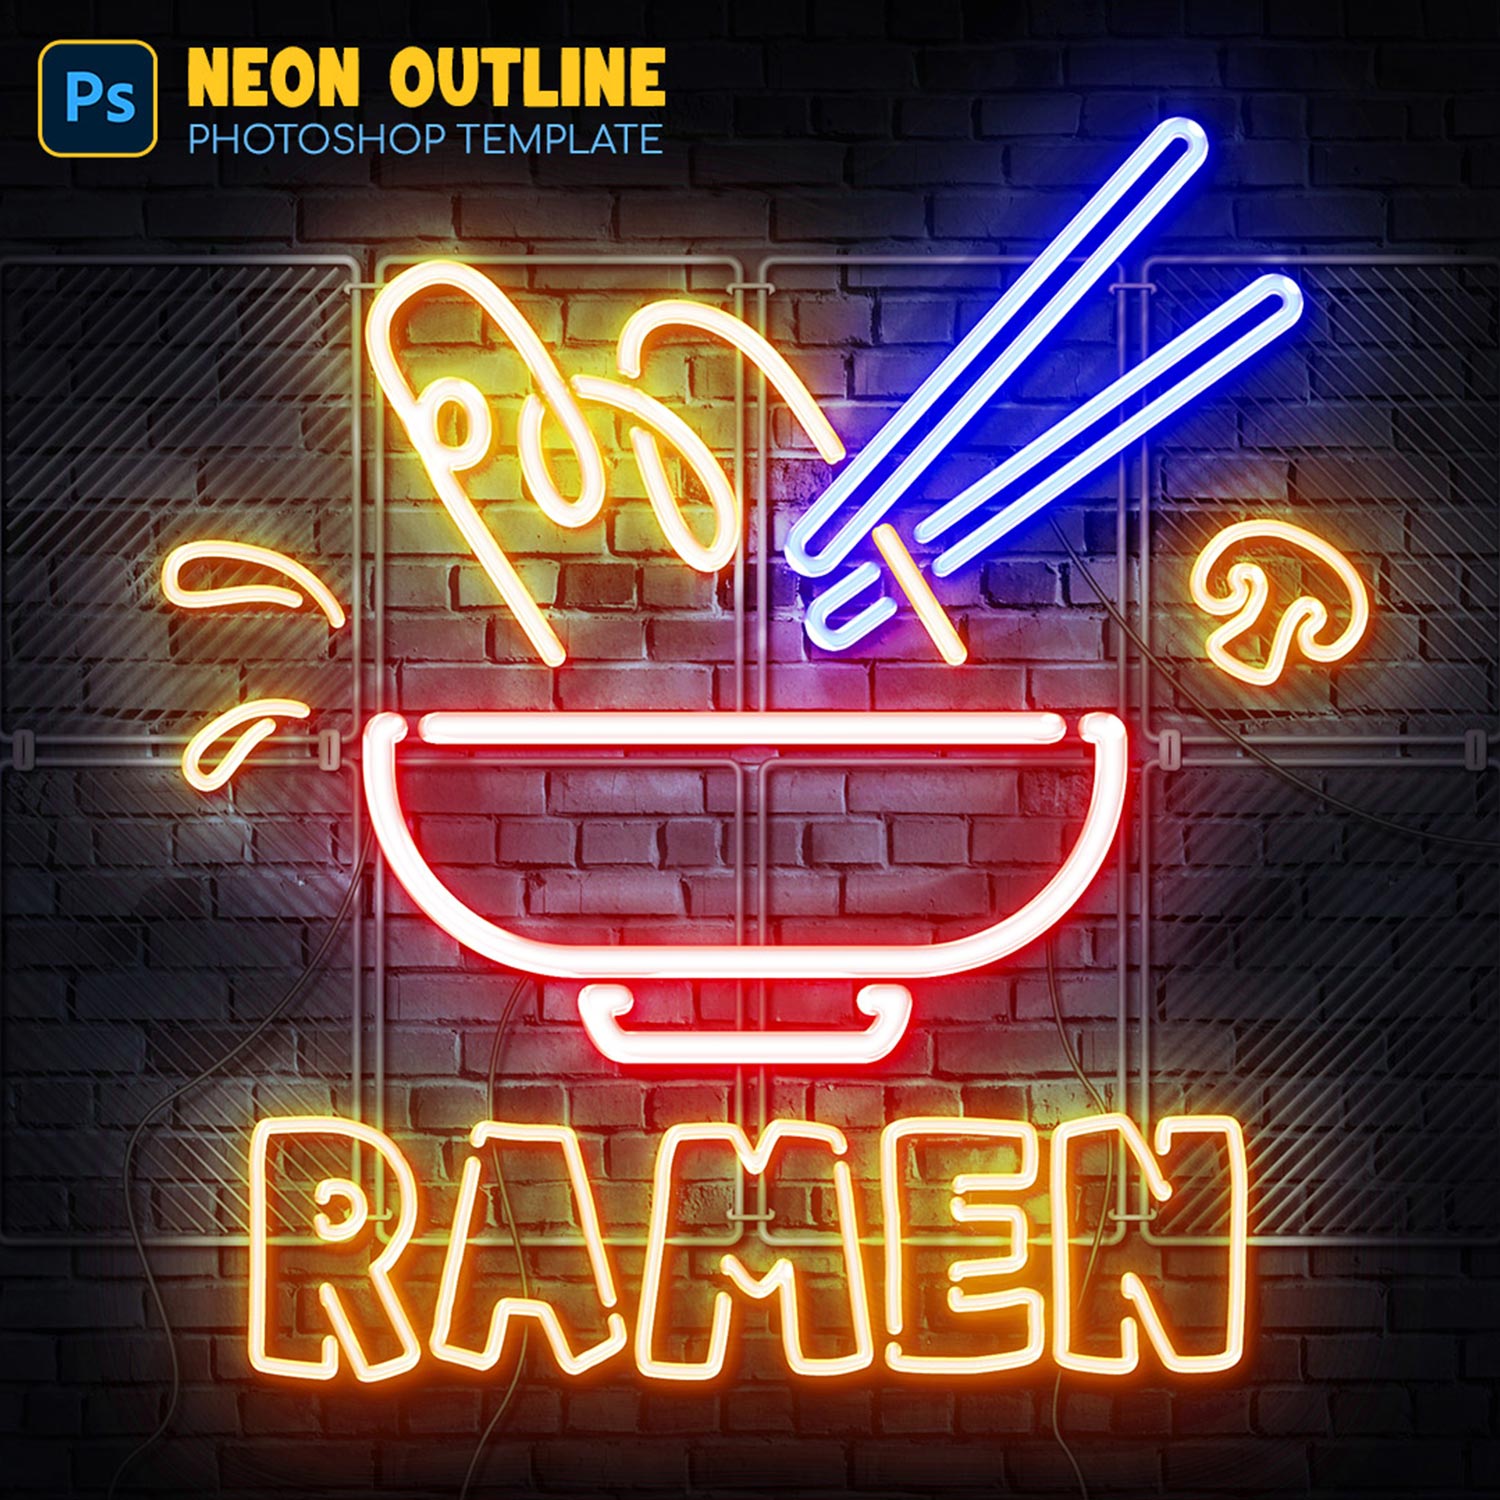 Neon Outline Photoshop Effect cover image.